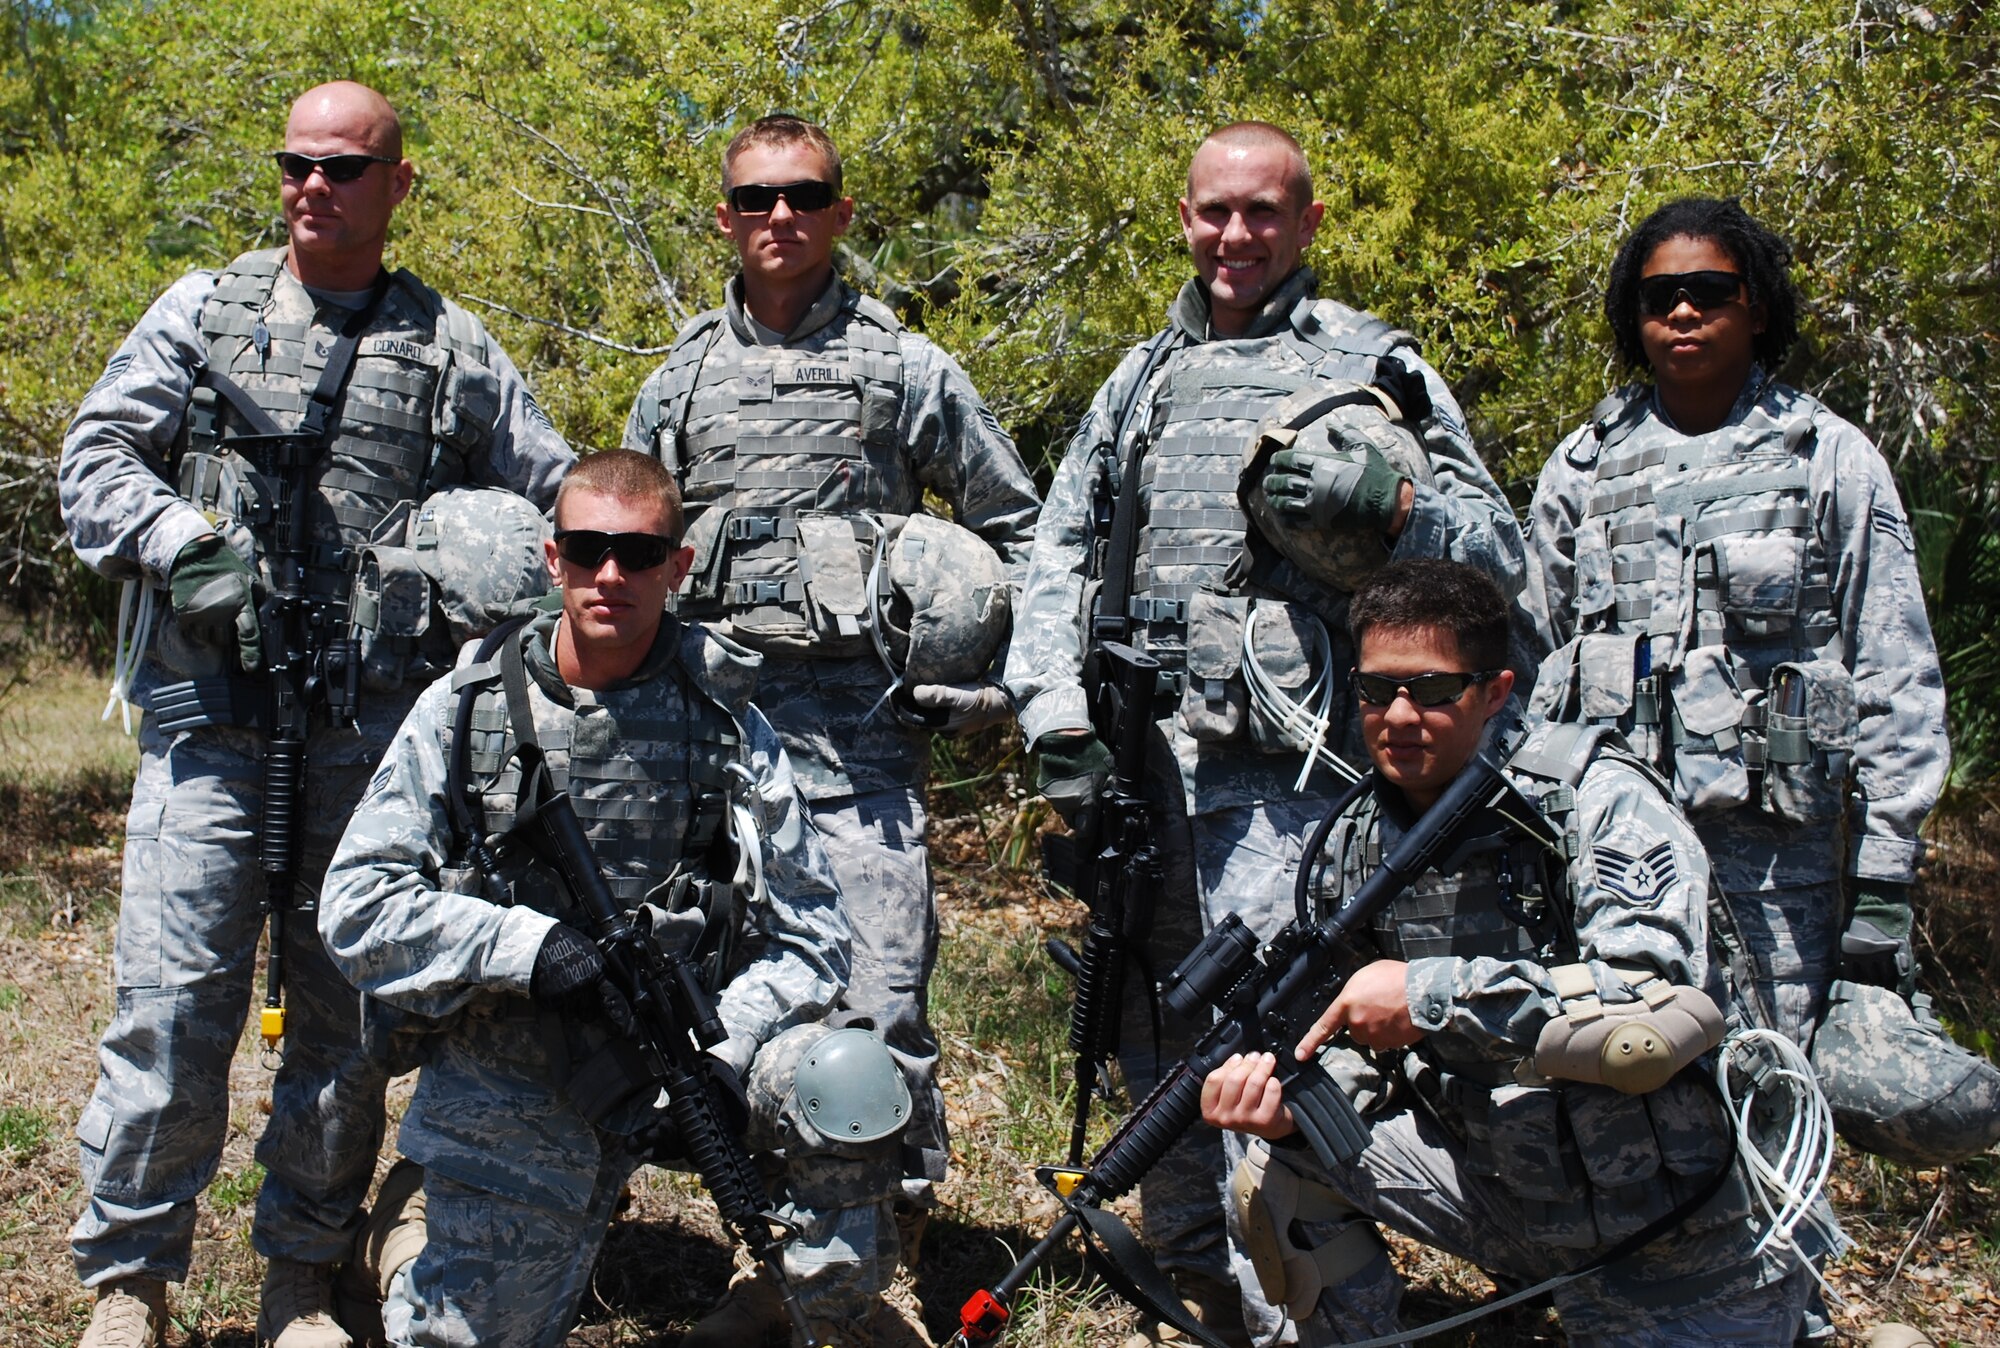 The 45th Space Wing Guardian Challenge Security Forces team, comprised of (top row left to right) Tech. Sgt. Steven Conard, Airman 1st Class Christopher Averill, Senior Airman Patrick Allen, (bottom row left to right) Airman 1st Class Kinesha Greenlee, Senior Airman Jered Dauterman and Staff Sgt. Justin Sonnier, following a day's training at Malabar Training Annex. (U.S. Air Force photo/Daniel Wade)